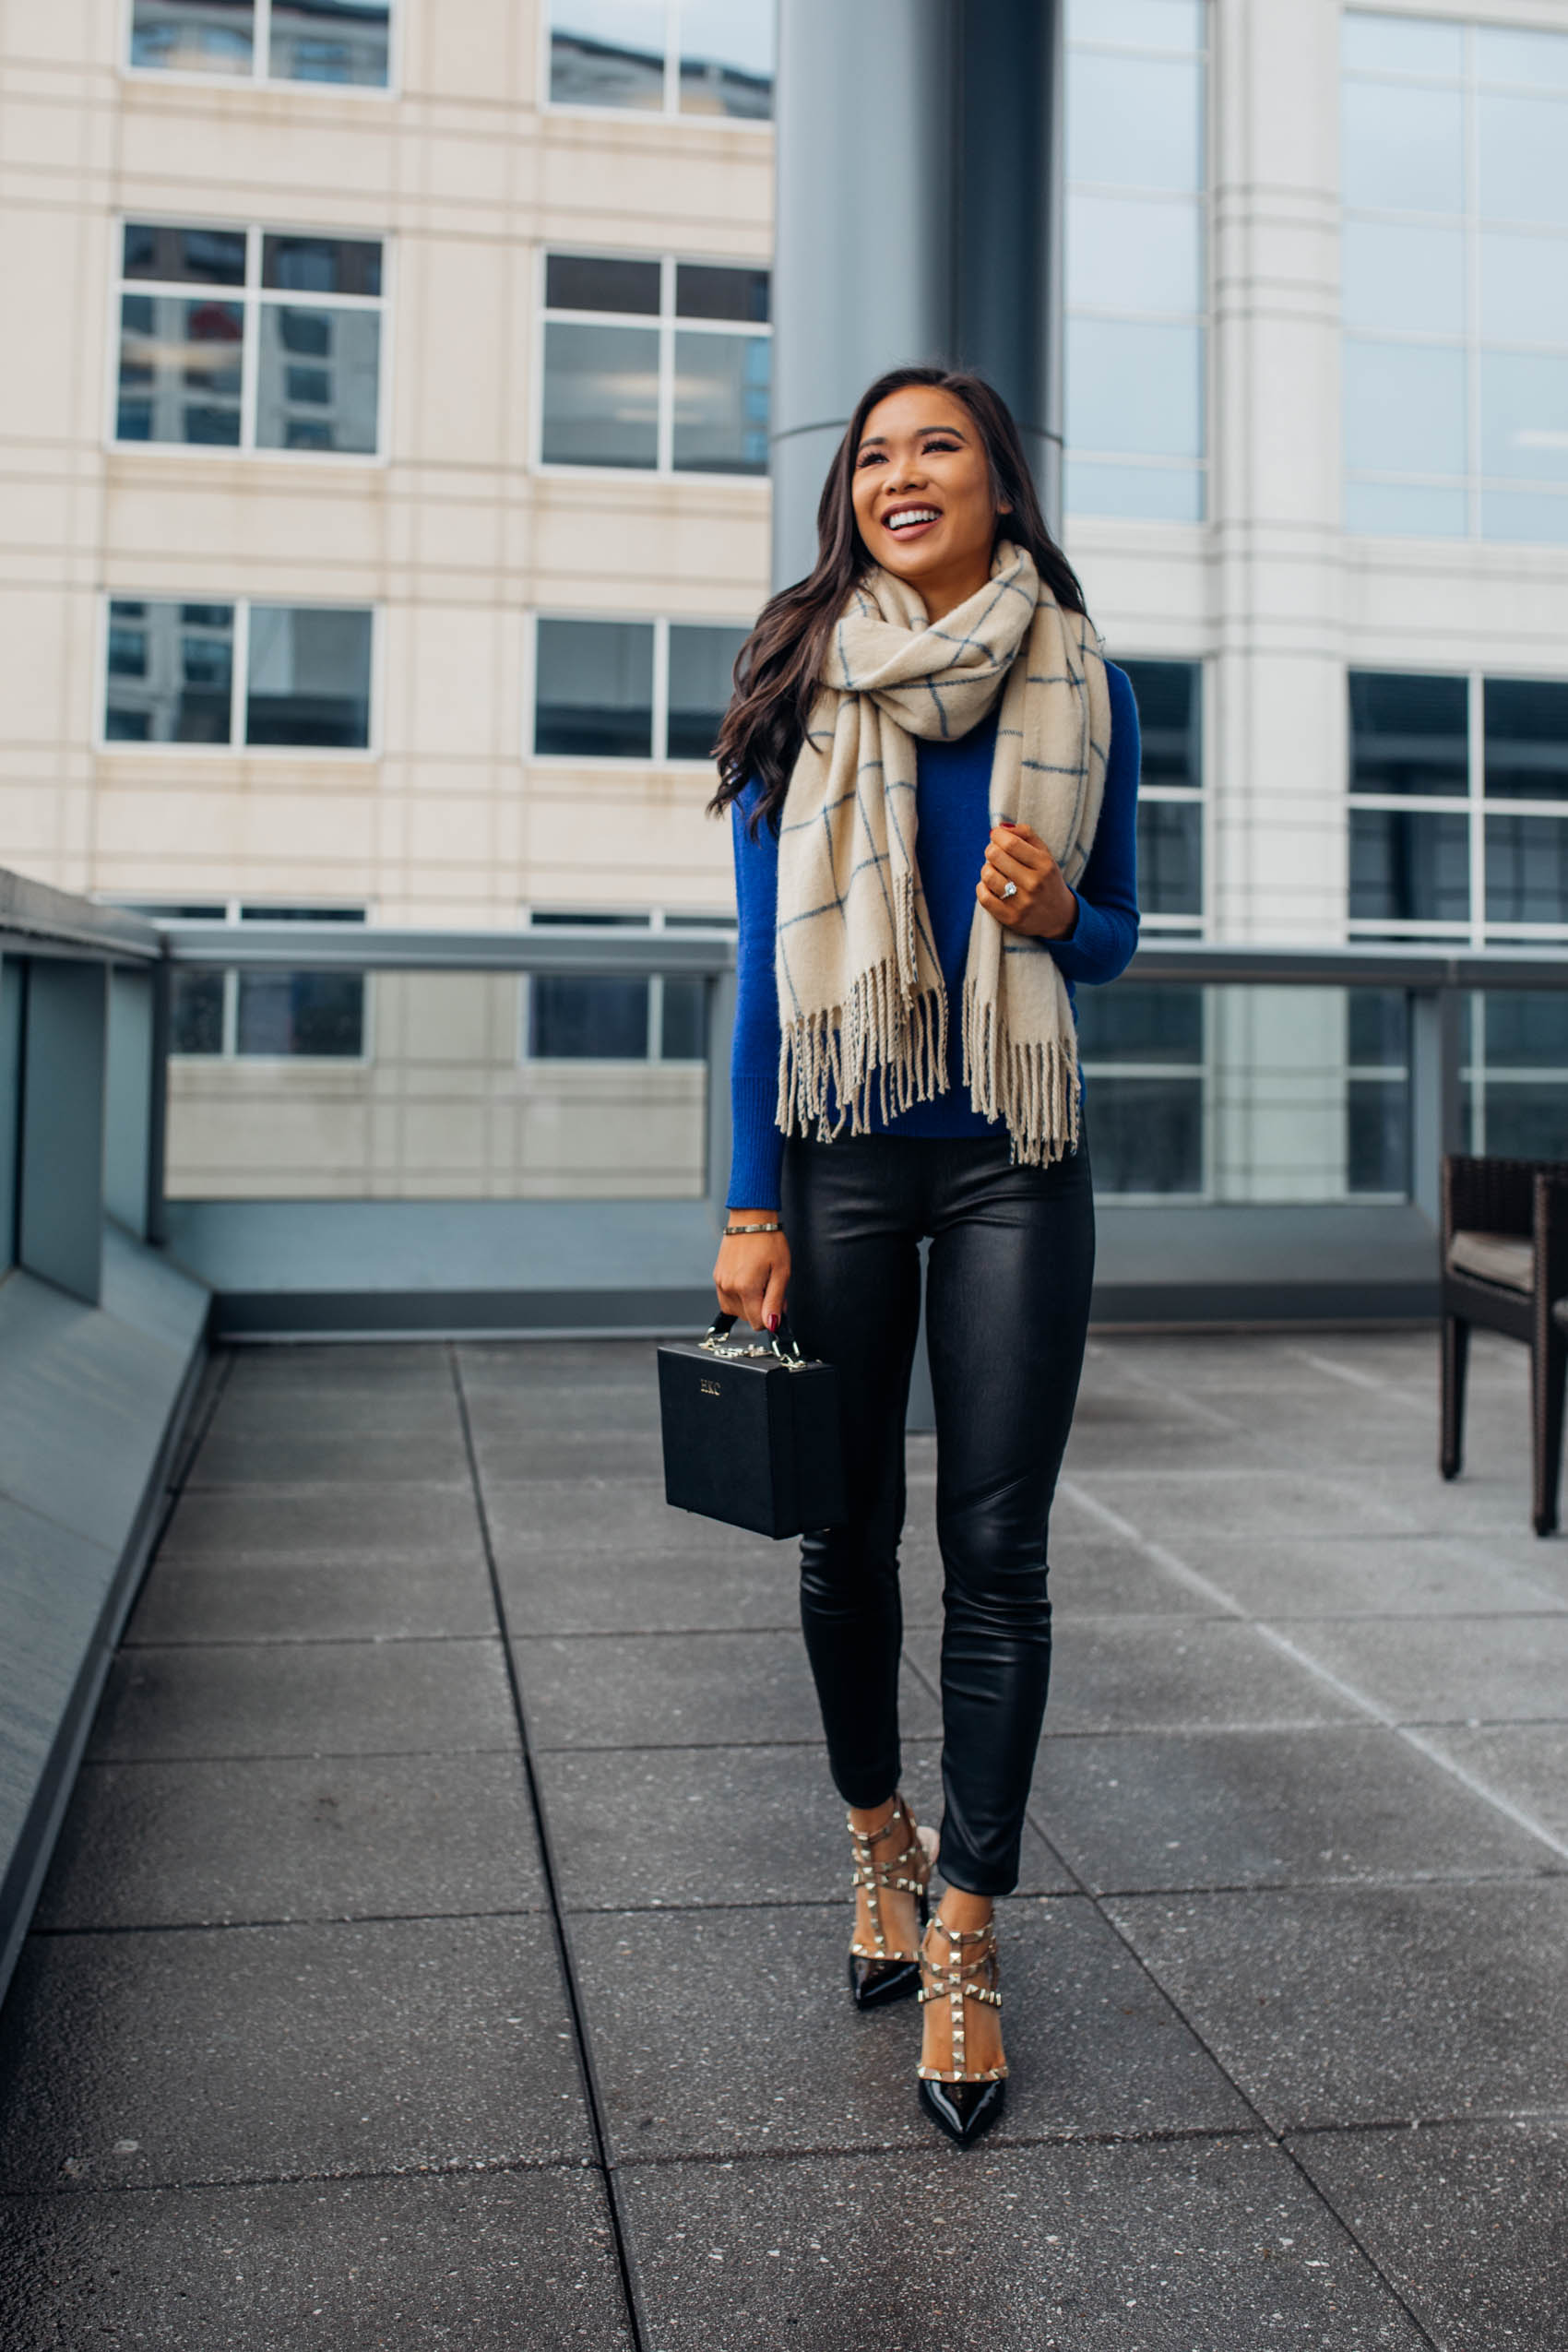 Hoang-Kim wears a cashmere scarf and sweater to stay warm